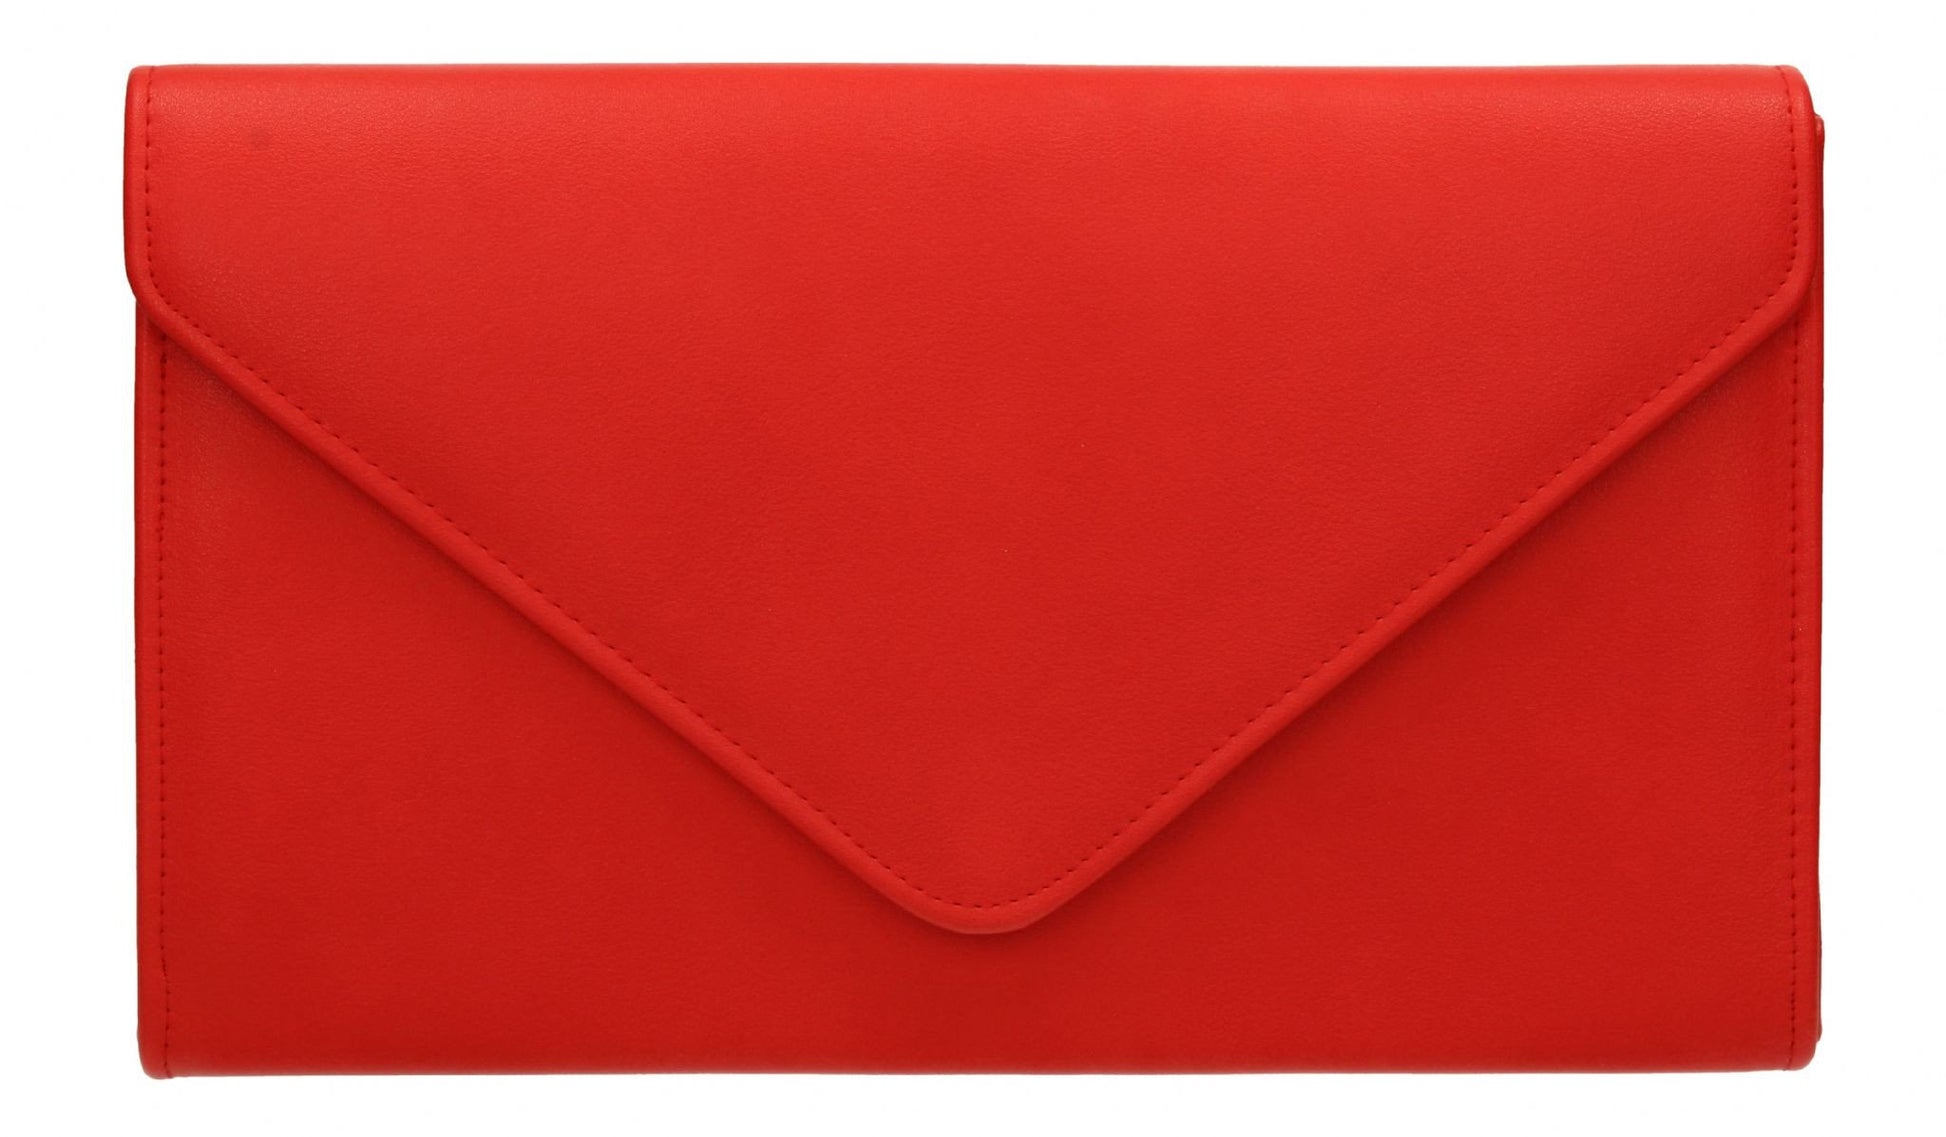 SWANKYSWANS Jenny Envelope Clutch Bag Red Cute Cheap Clutch Bag For Weddings School and Work